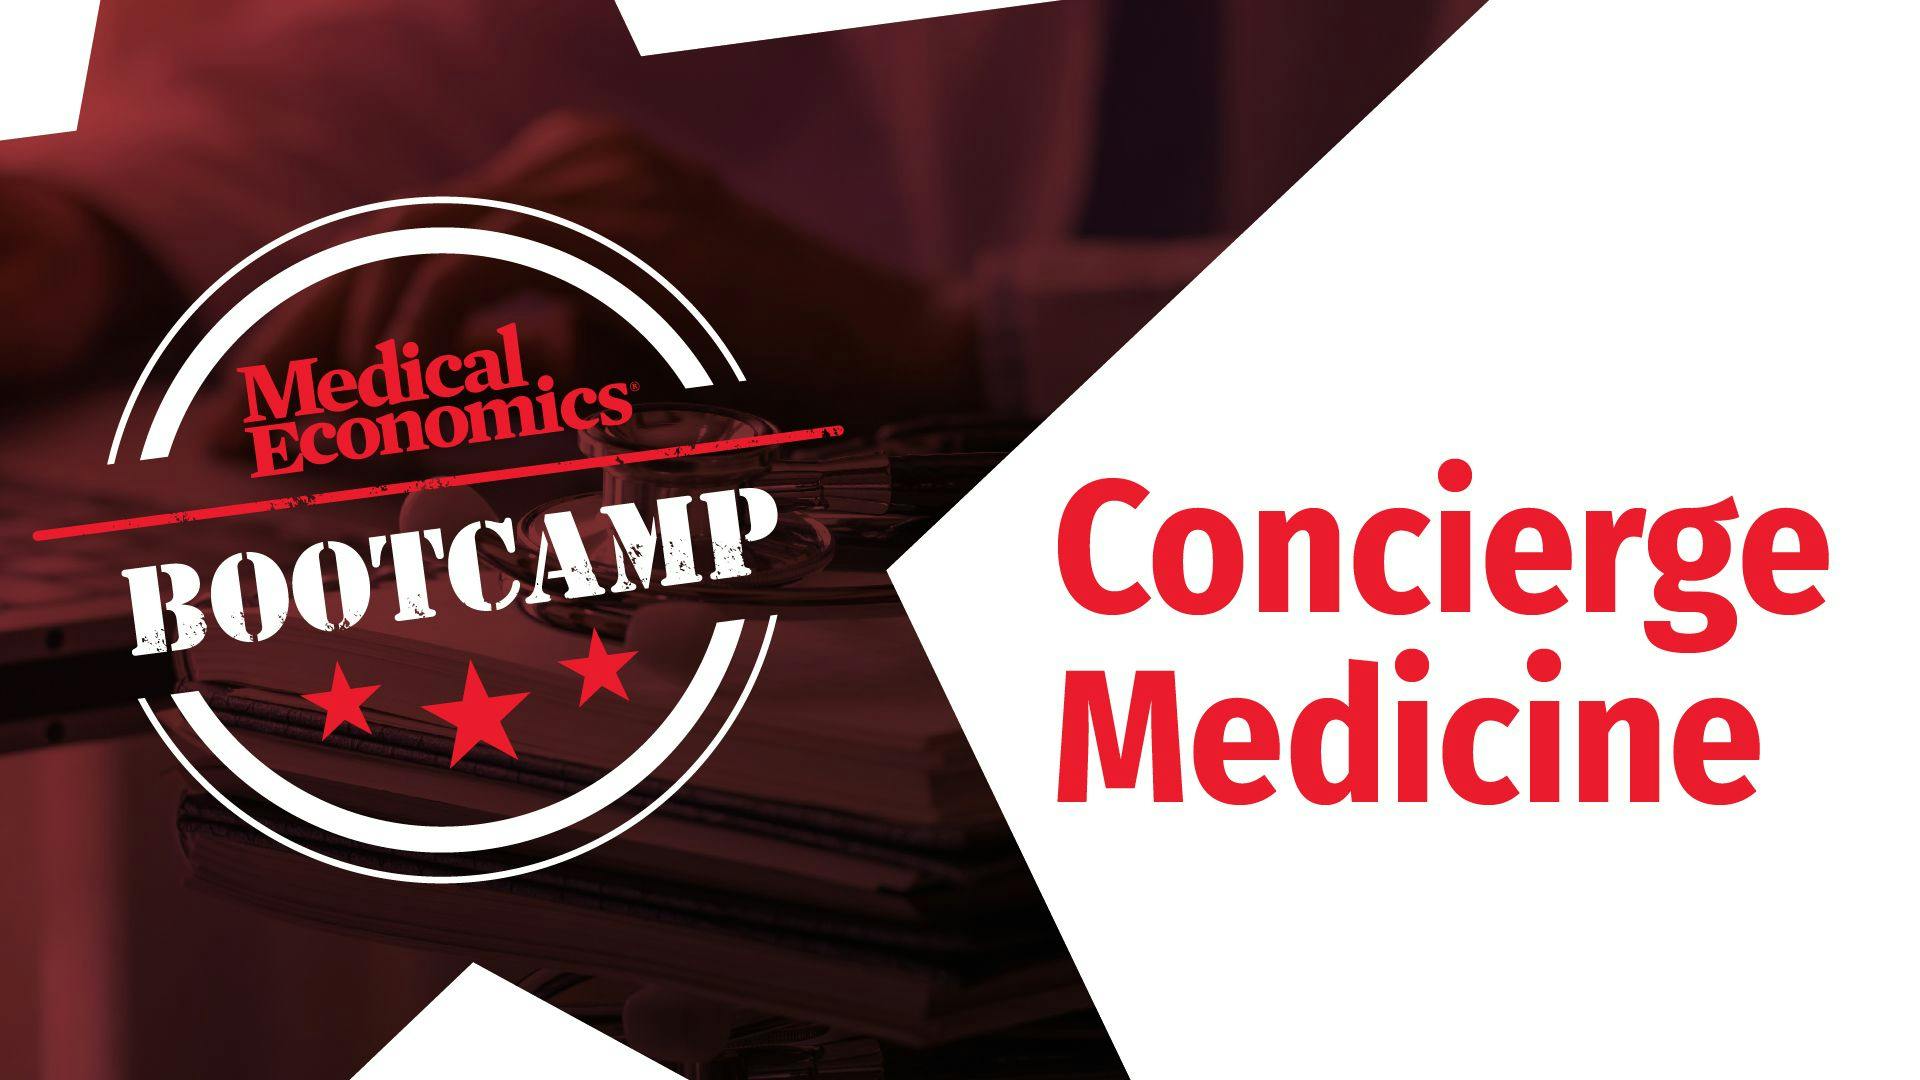 Session 5: Tales From the Trenches: A Concierge Medicine Roundtable